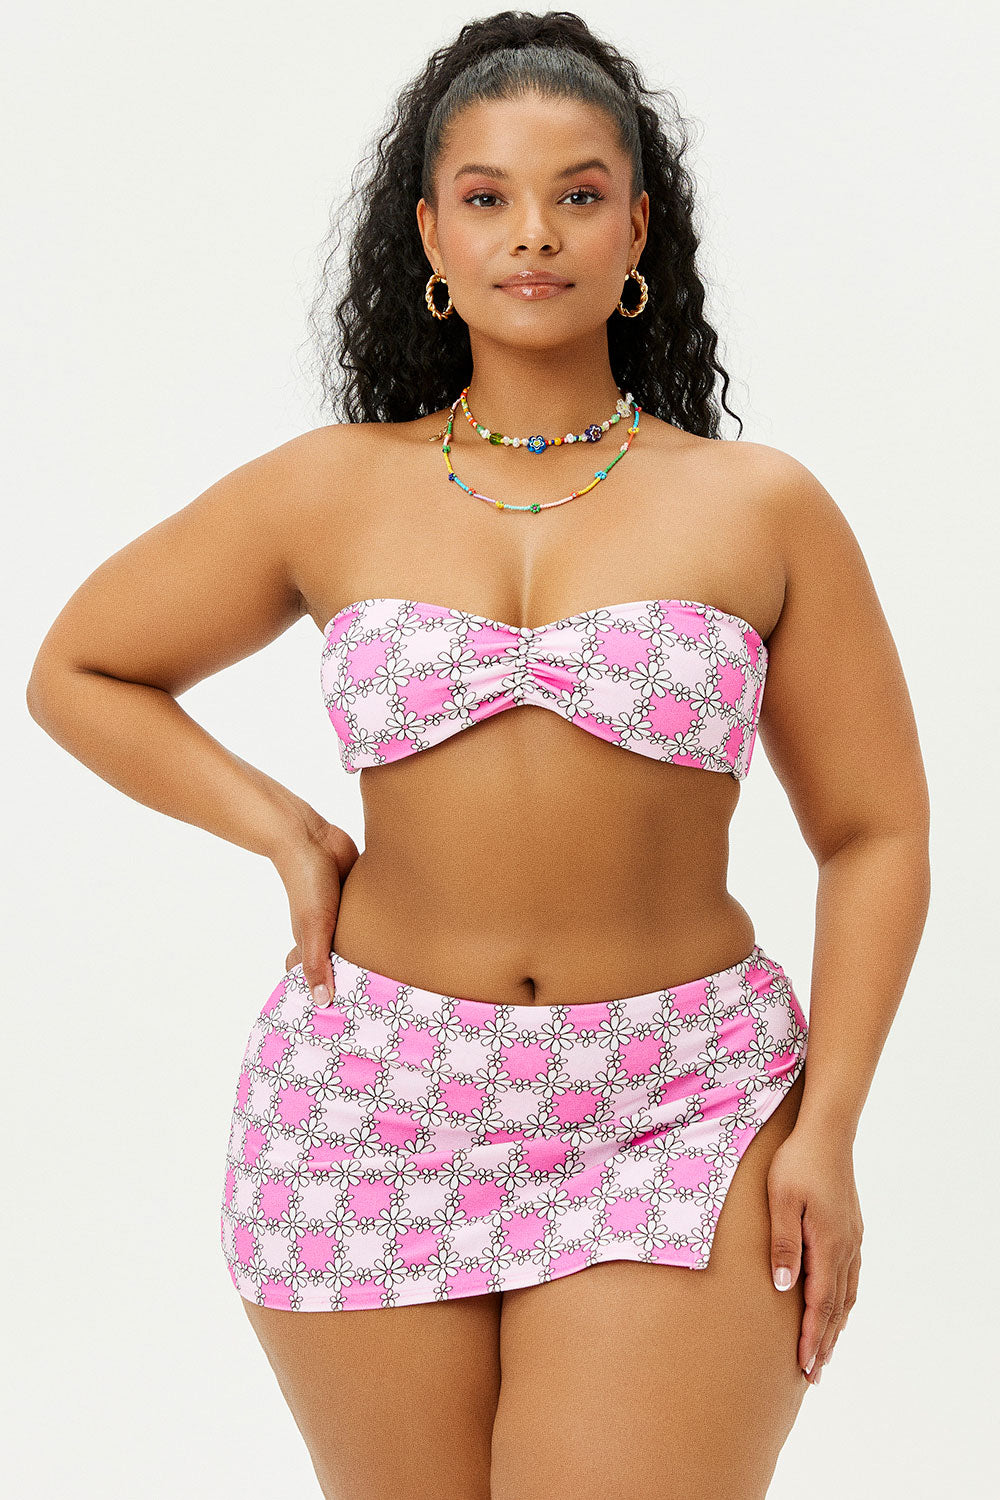 Jeanette Terry Strapless Bikini Top - Pink Daisy